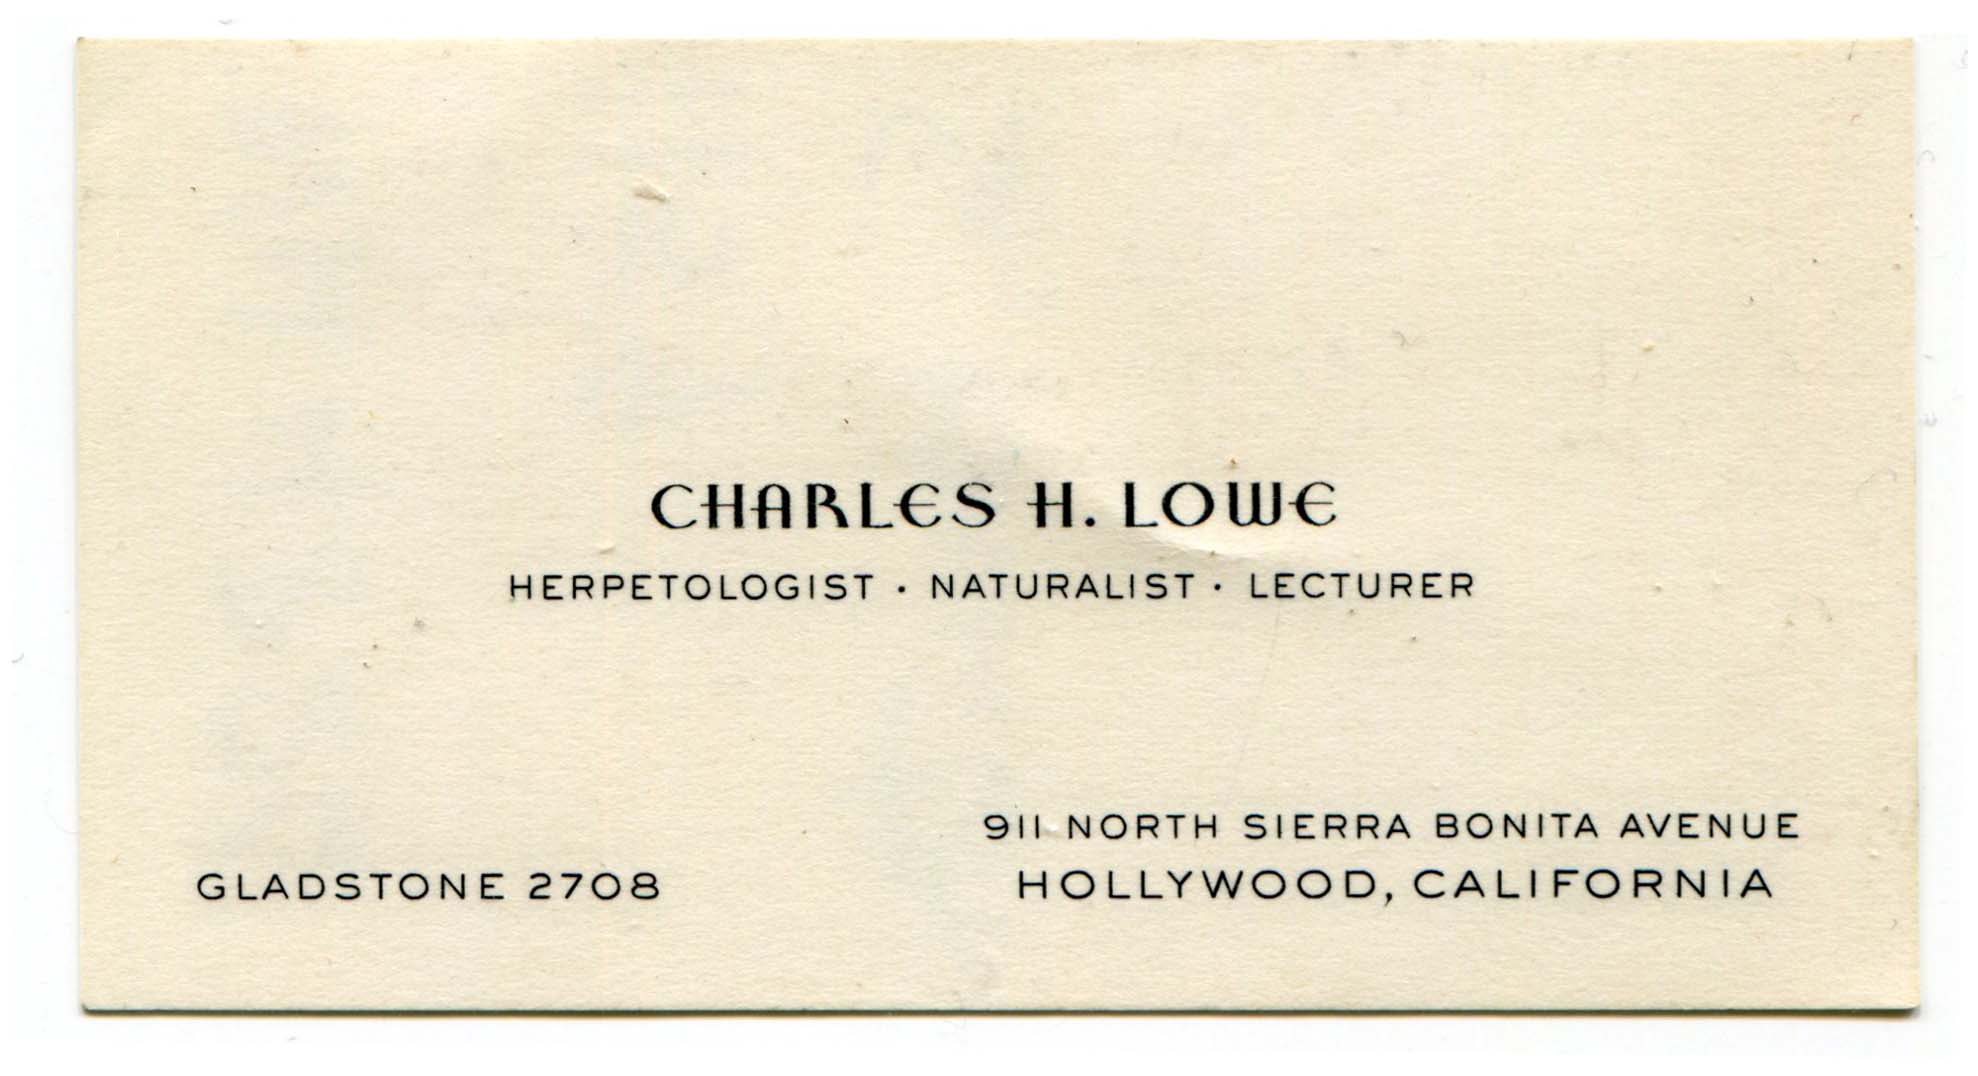 Charles H. Lowe's card, given in 1974 to Robert Bezy and Kathryn Bolles by Doris Sidall, Lowe's  high school biology teacher